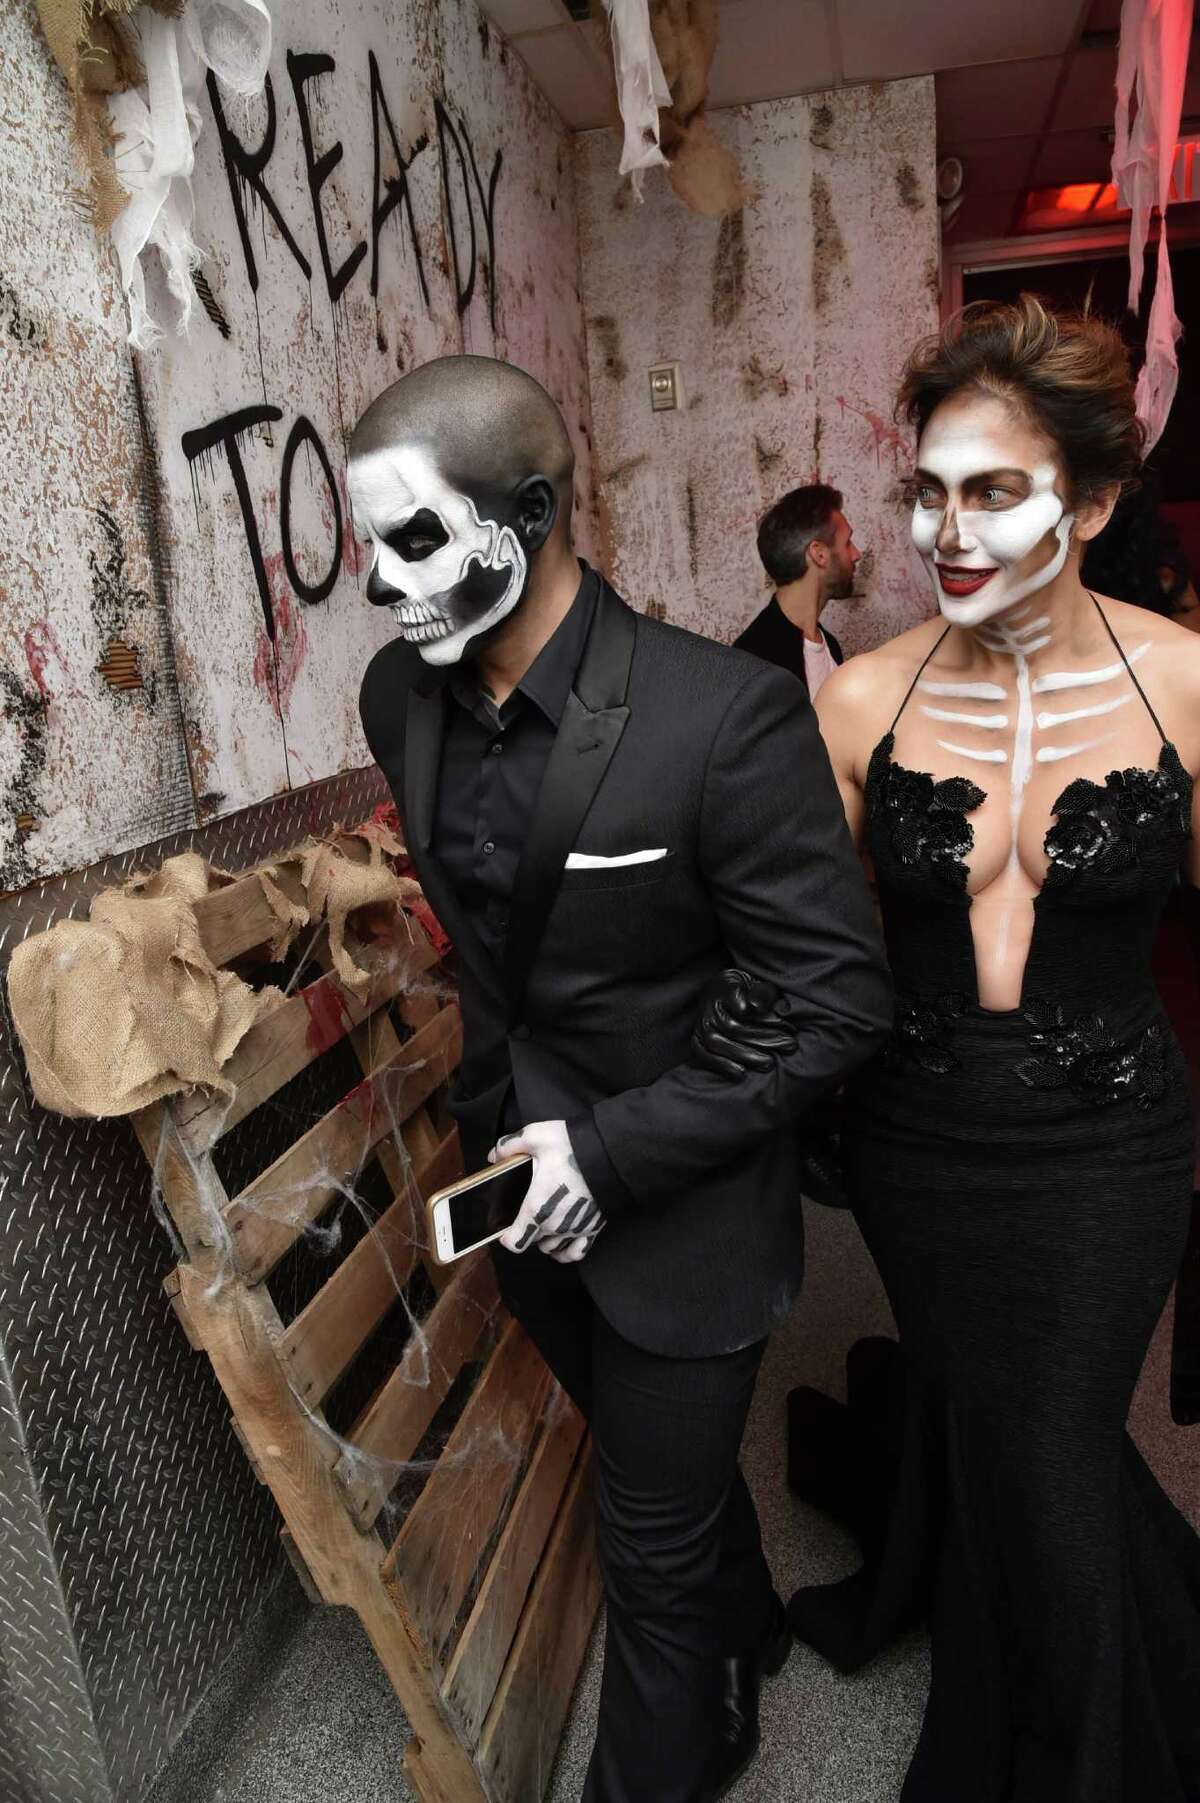 See how Heidi Klum and other celebs went all out for Halloween